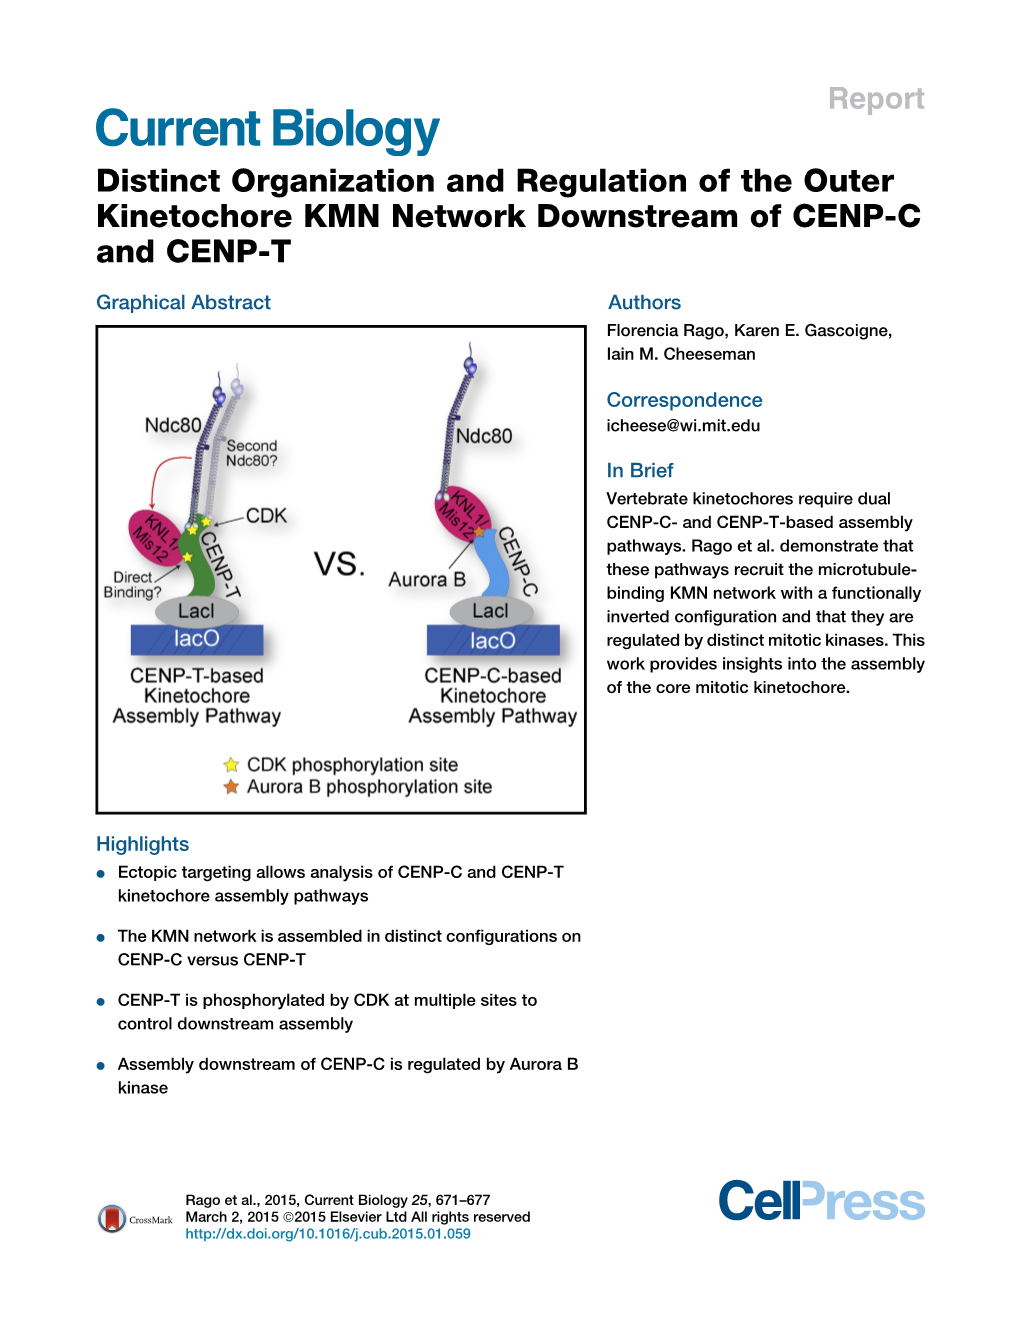 Distinct Organization and Regulation of the Outer Kinetochore KMN Network Downstream of CENP-C and CENP-T